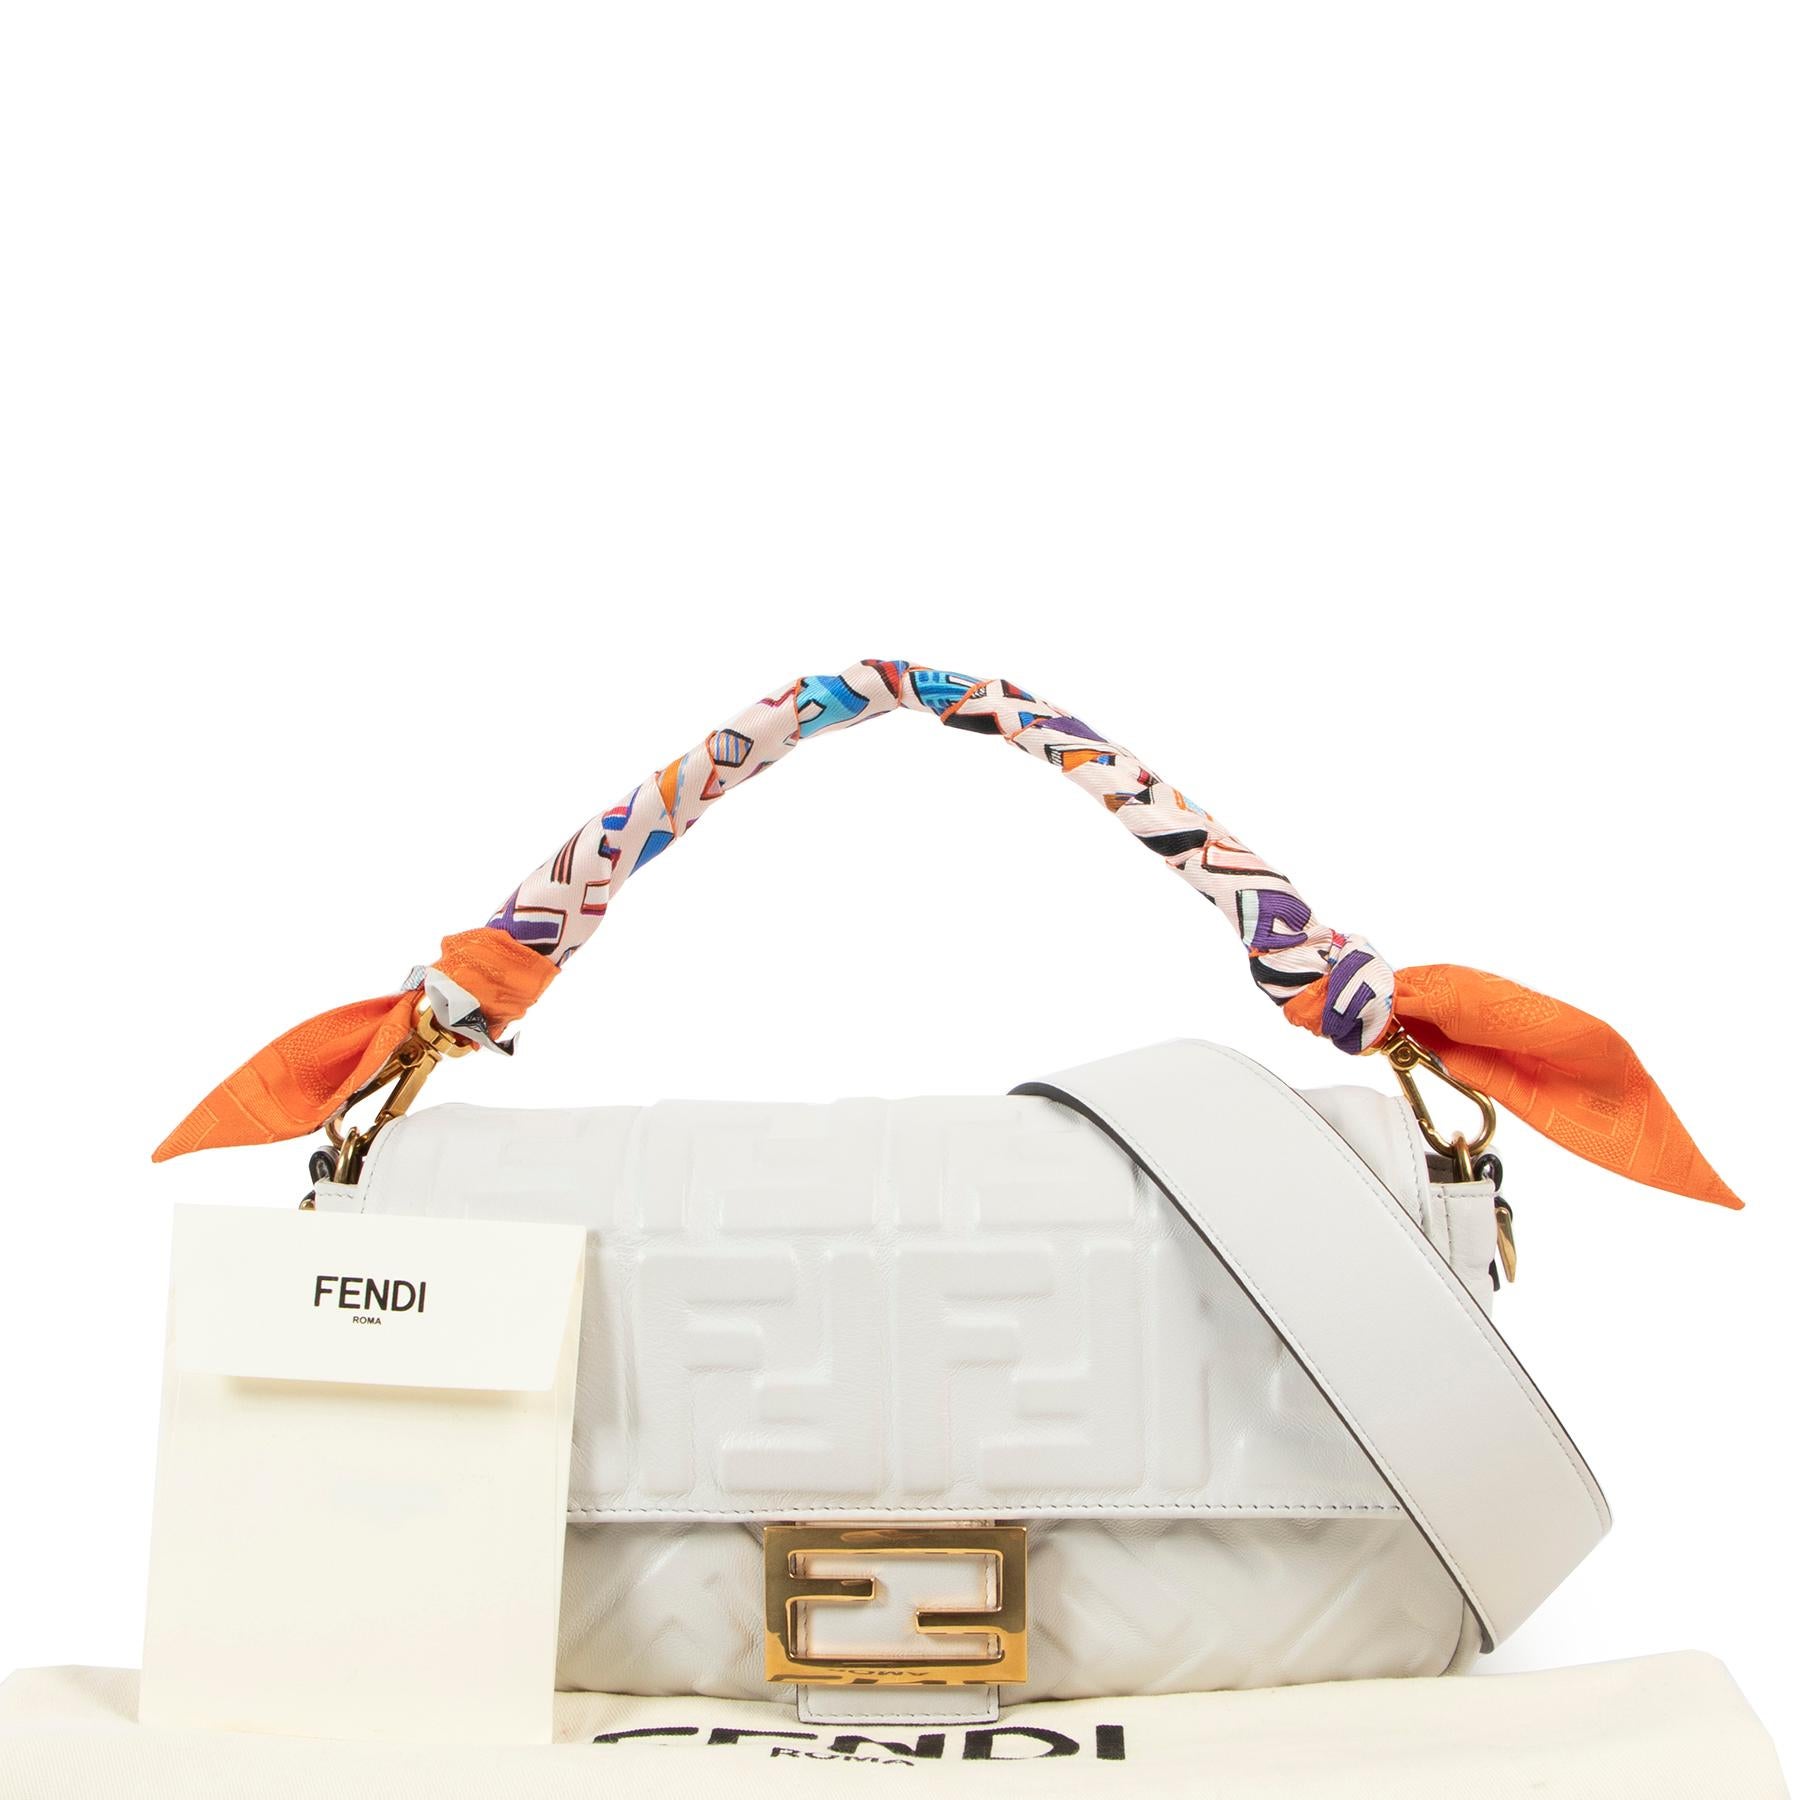 Fendi White Baguette Shoulder Bag + Multicolor Wrappy

The Baguette bag by Fendi was made popular in the 90's and is still every bit the icon nowadays. This medium Baguette bag is crafted out of  soft nappa leather with a three-dimensional tembossed